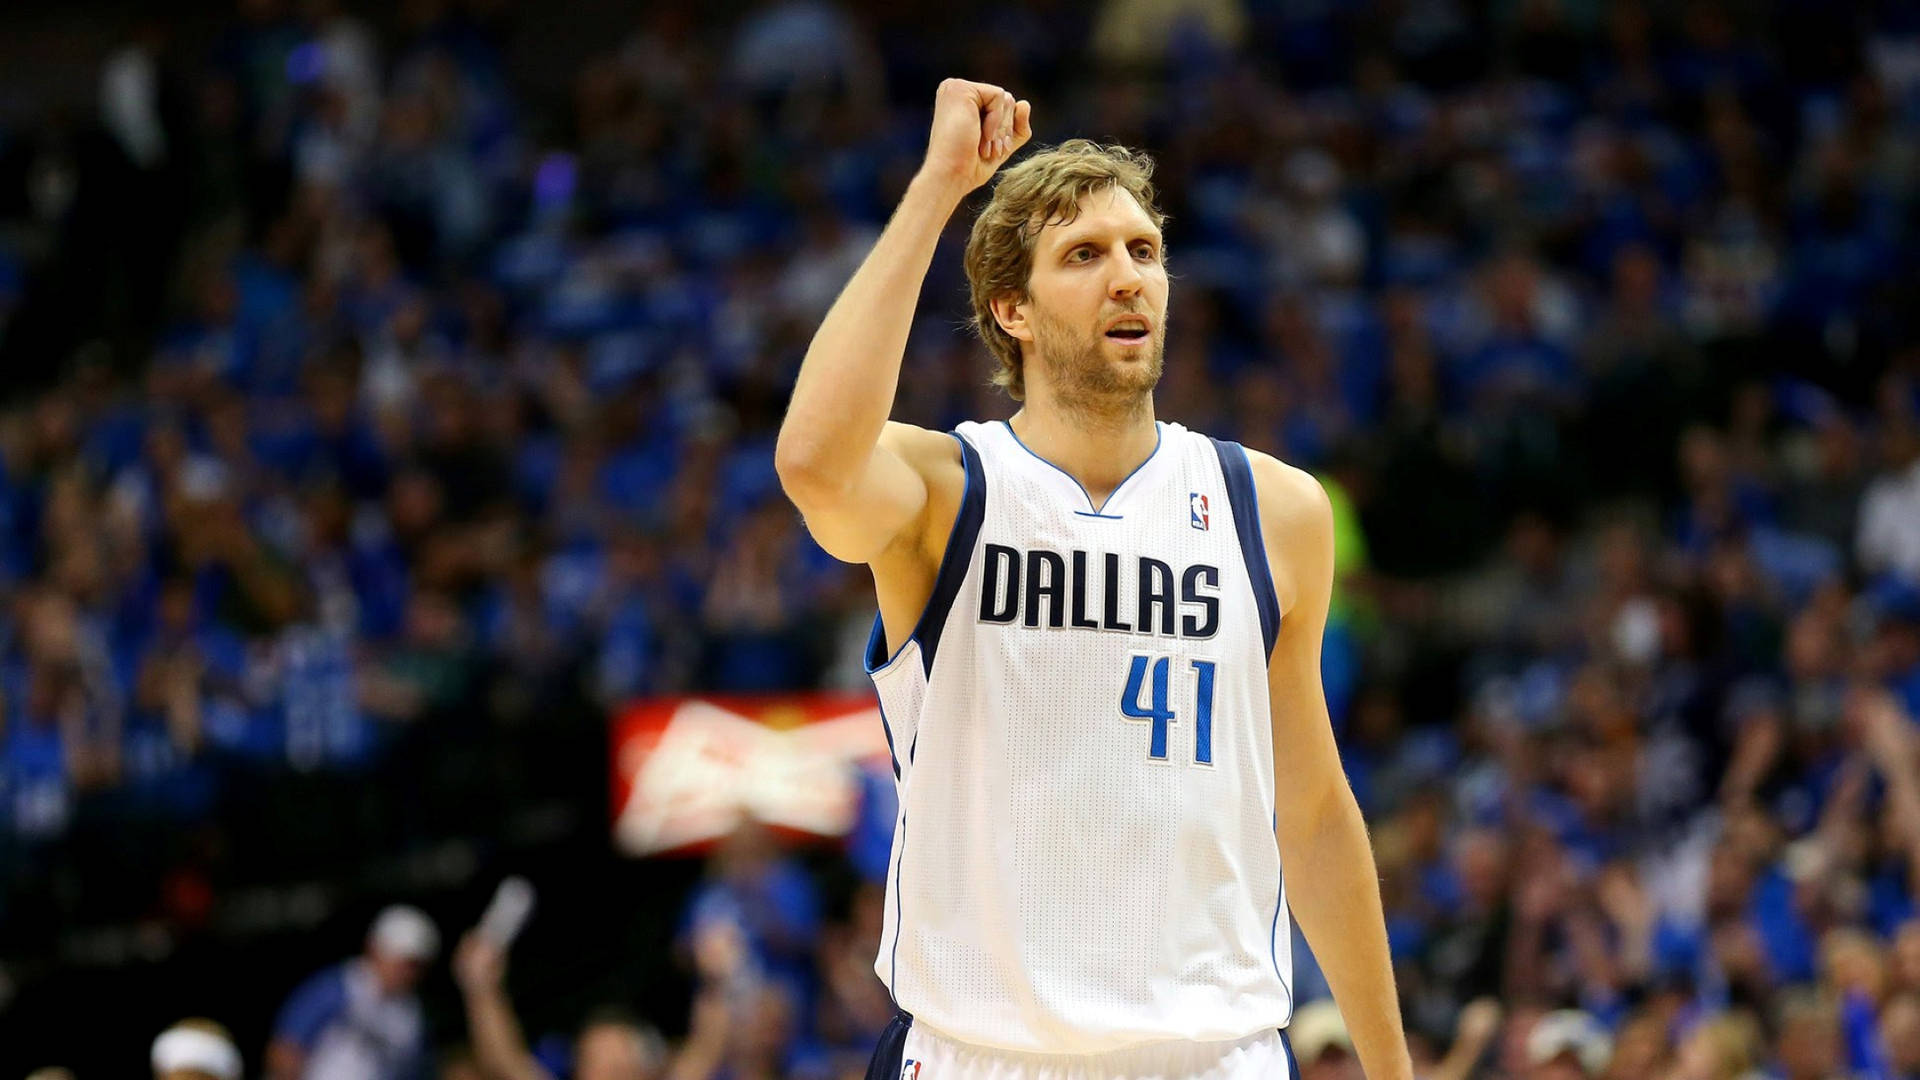 Dallas41 Dirk Nowitzki Would Be Translated To 